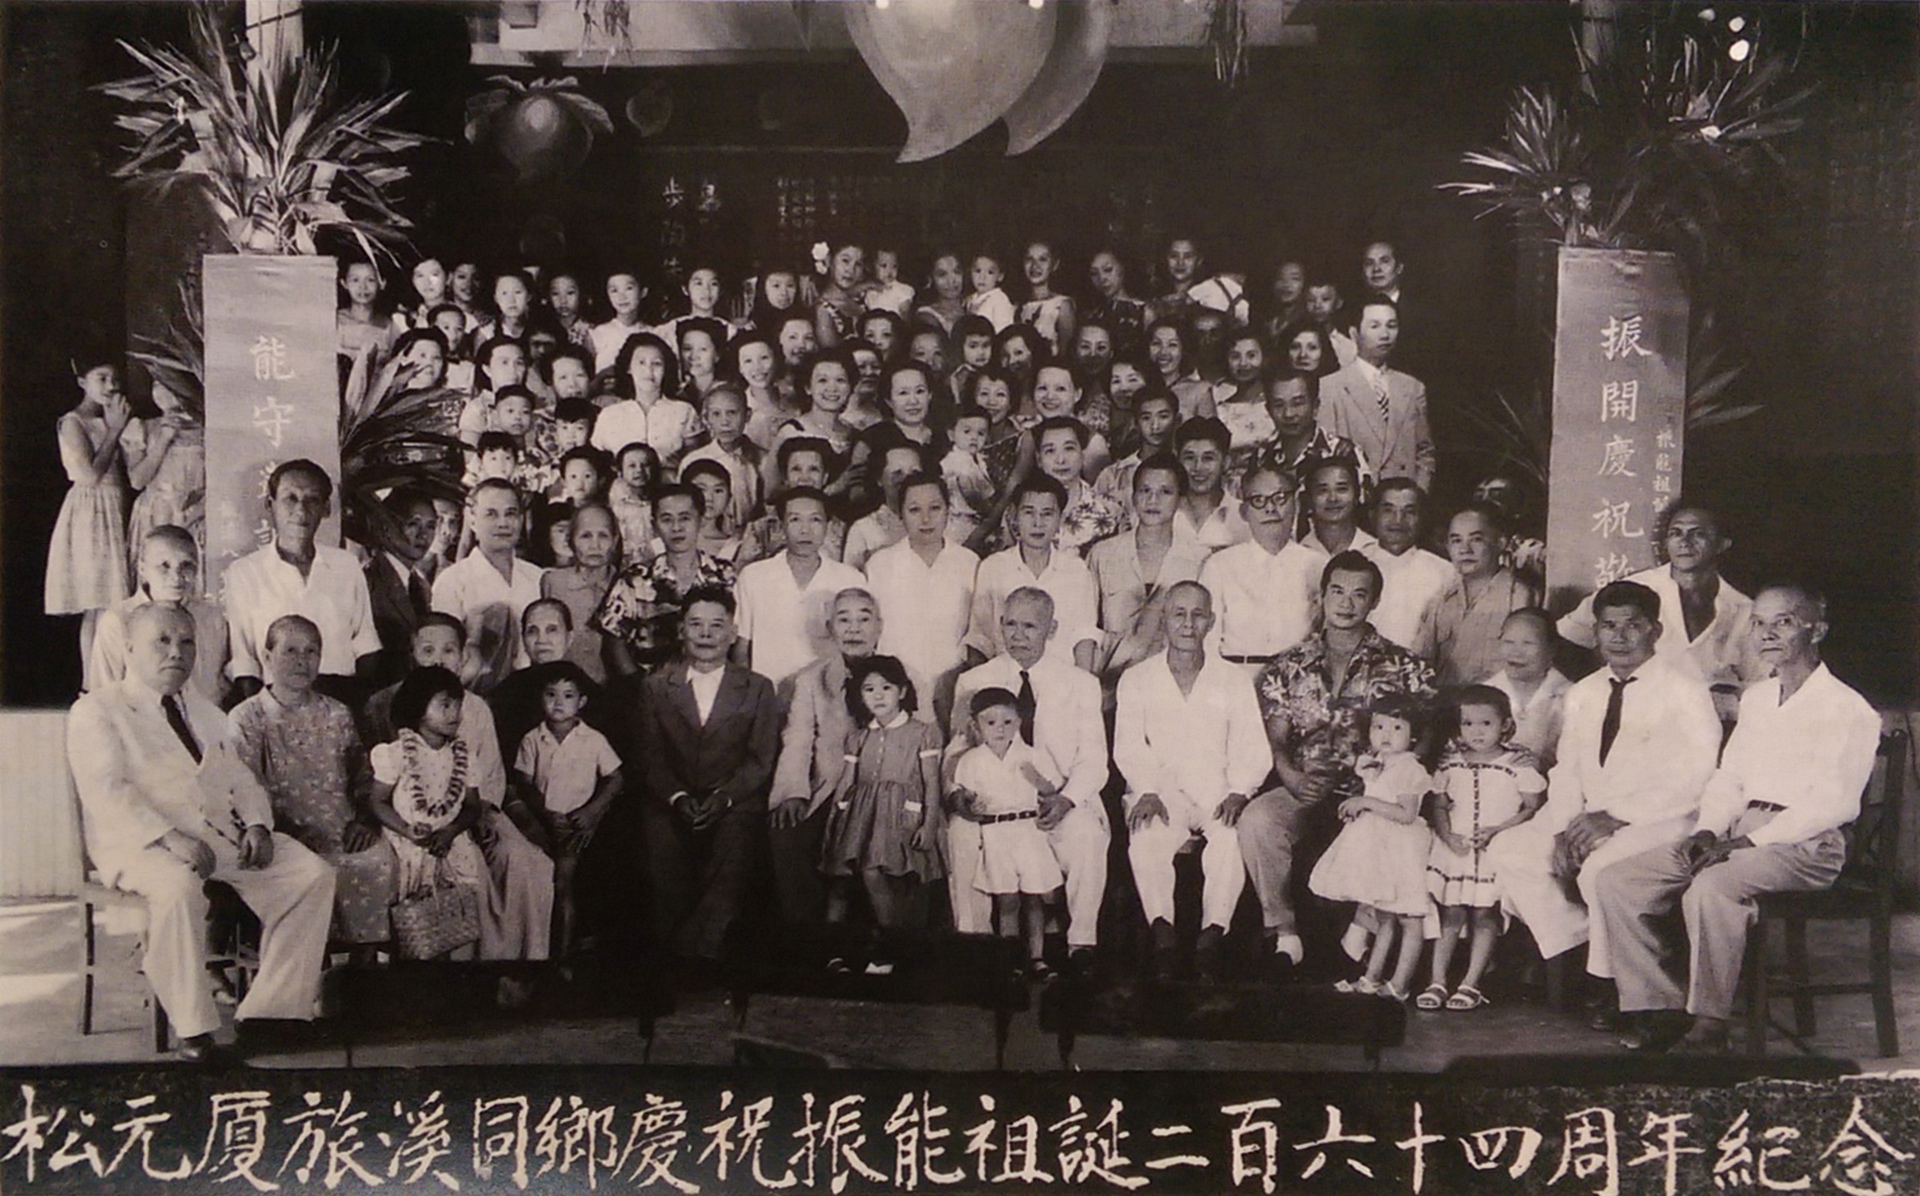 Generations of Chinese Chen posing for a black and white vintage family photo